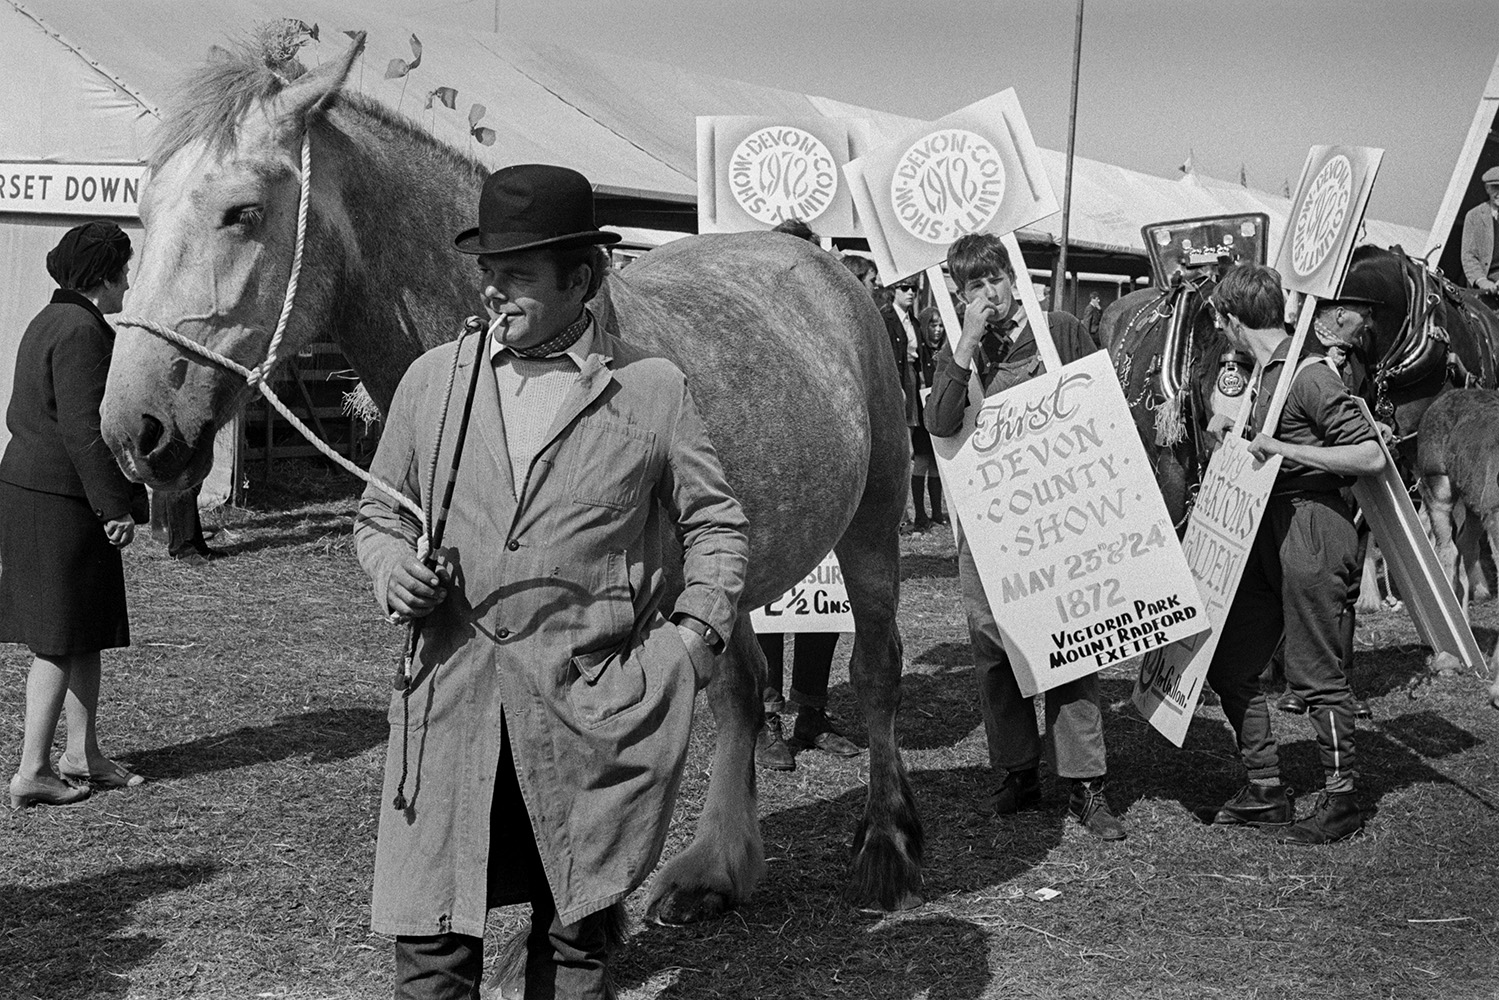 A Horse being led through visitors at the Devon County Show in Whipton, Exeter, by a man wearing a bowler hat. Boys in the background re wearing sandwich boards advertising the Show.